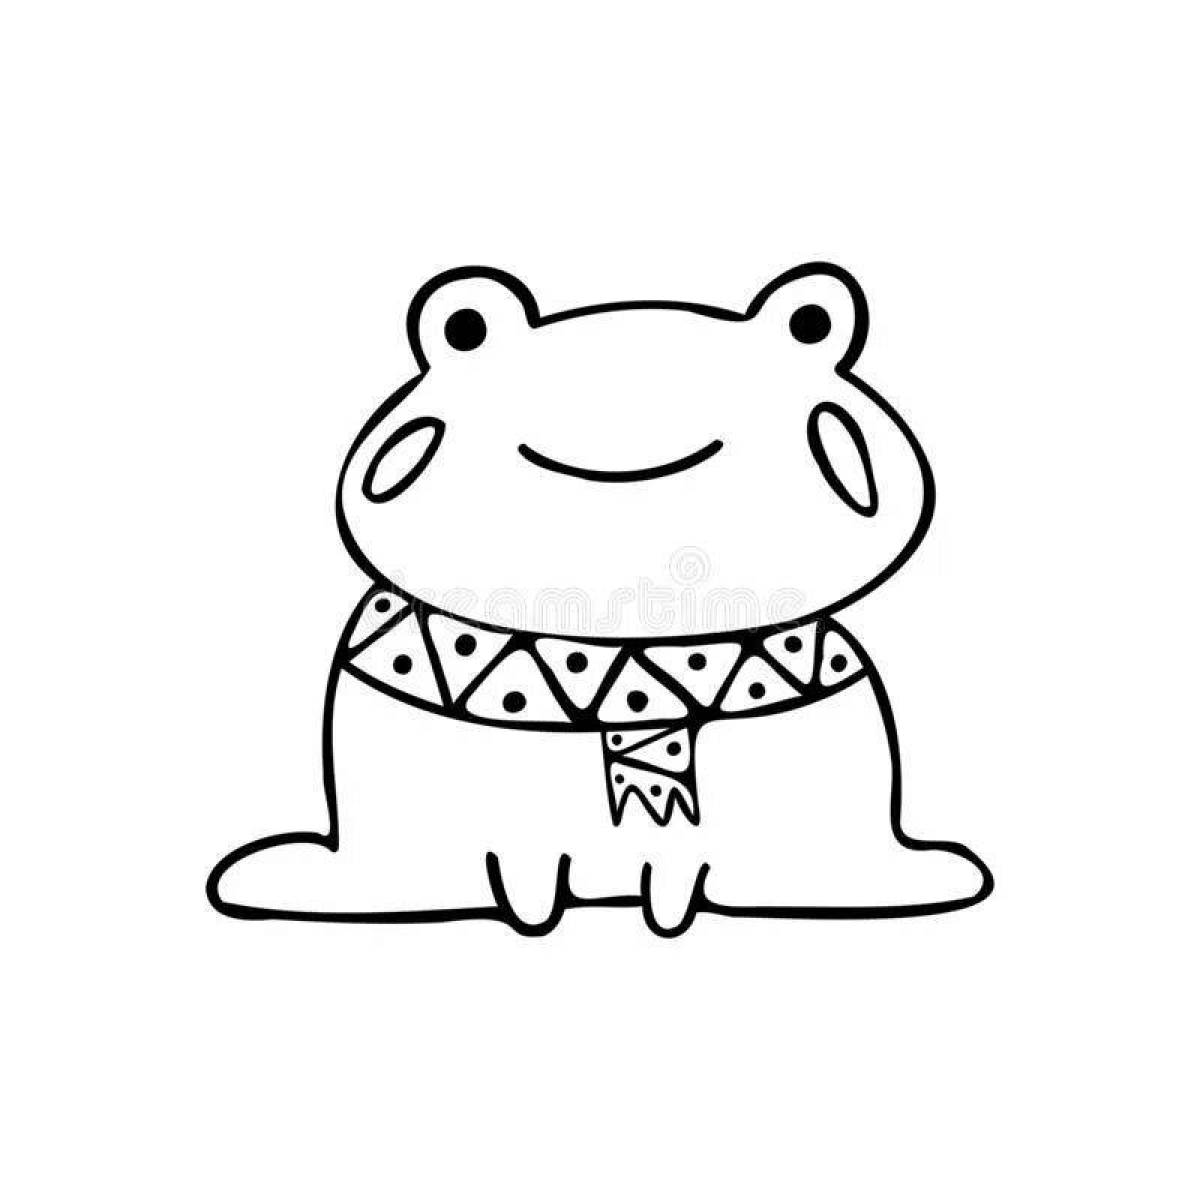 Colorful cute frog coloring book